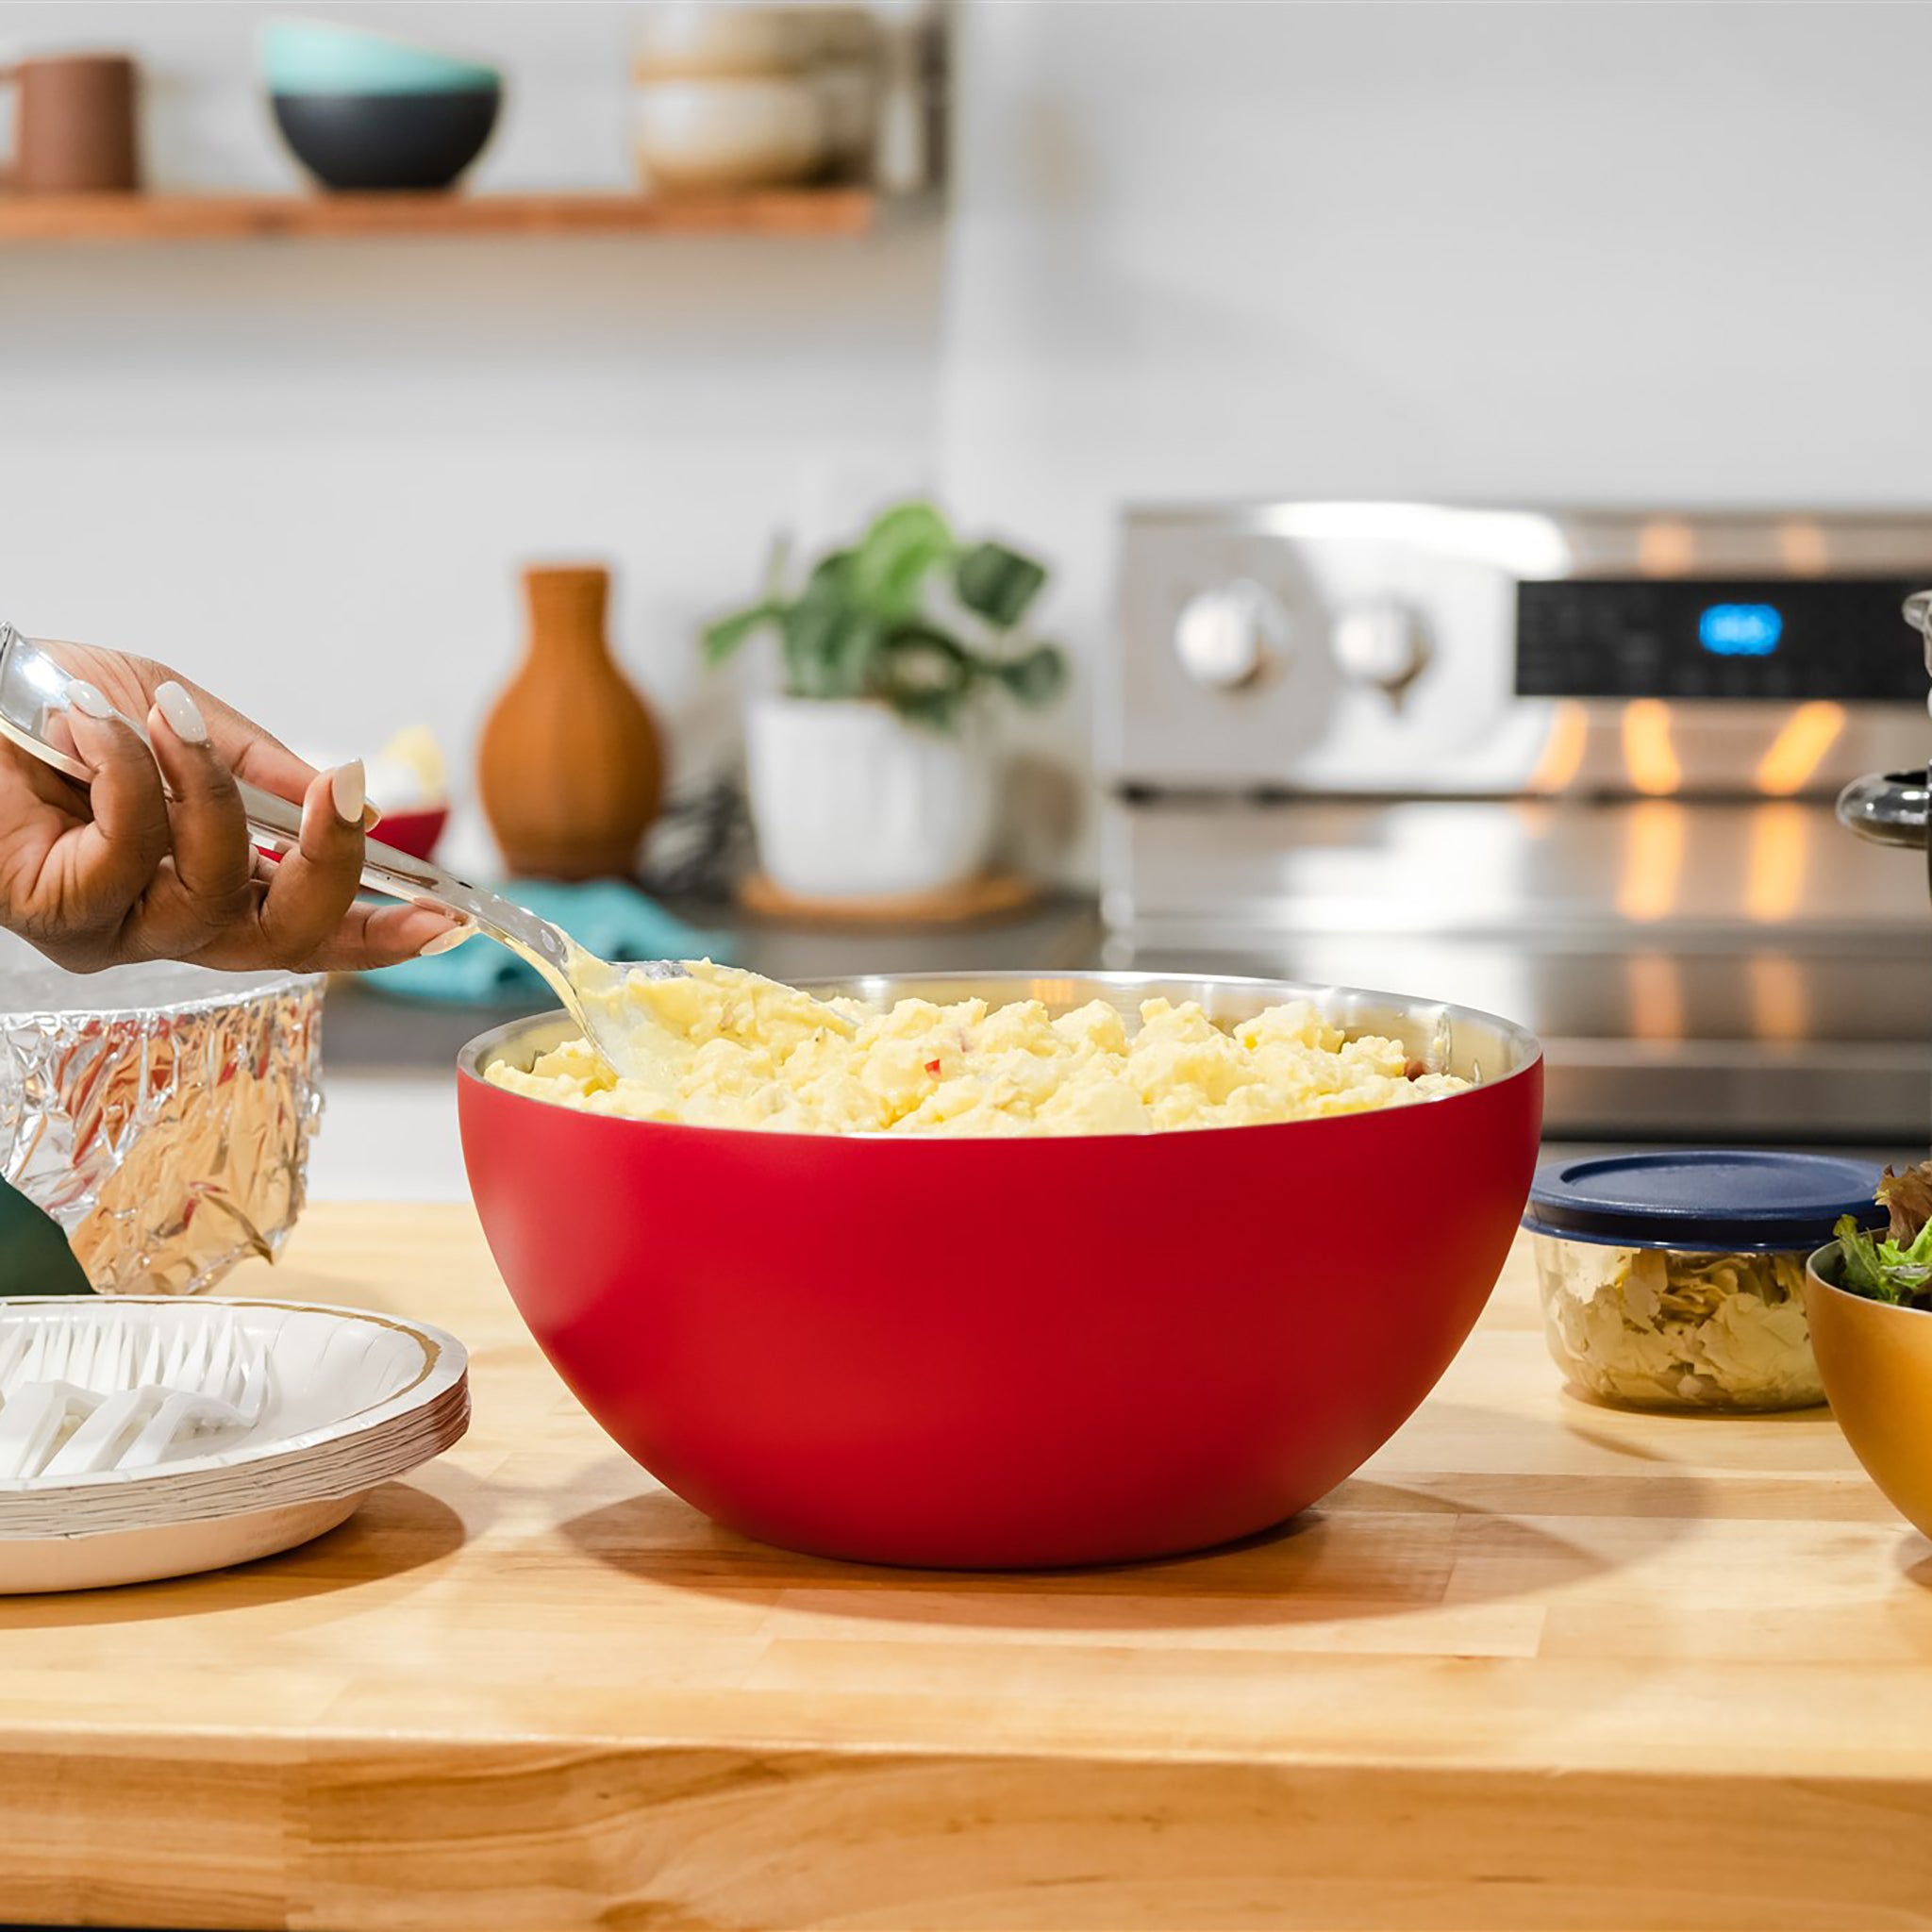 served Brand | Premium Large Serving Bowl - Keep Food Hot or Cold for Hours  with our Vacuum-Insulated, Double-Walled, Copper-Lined Stainless Steel